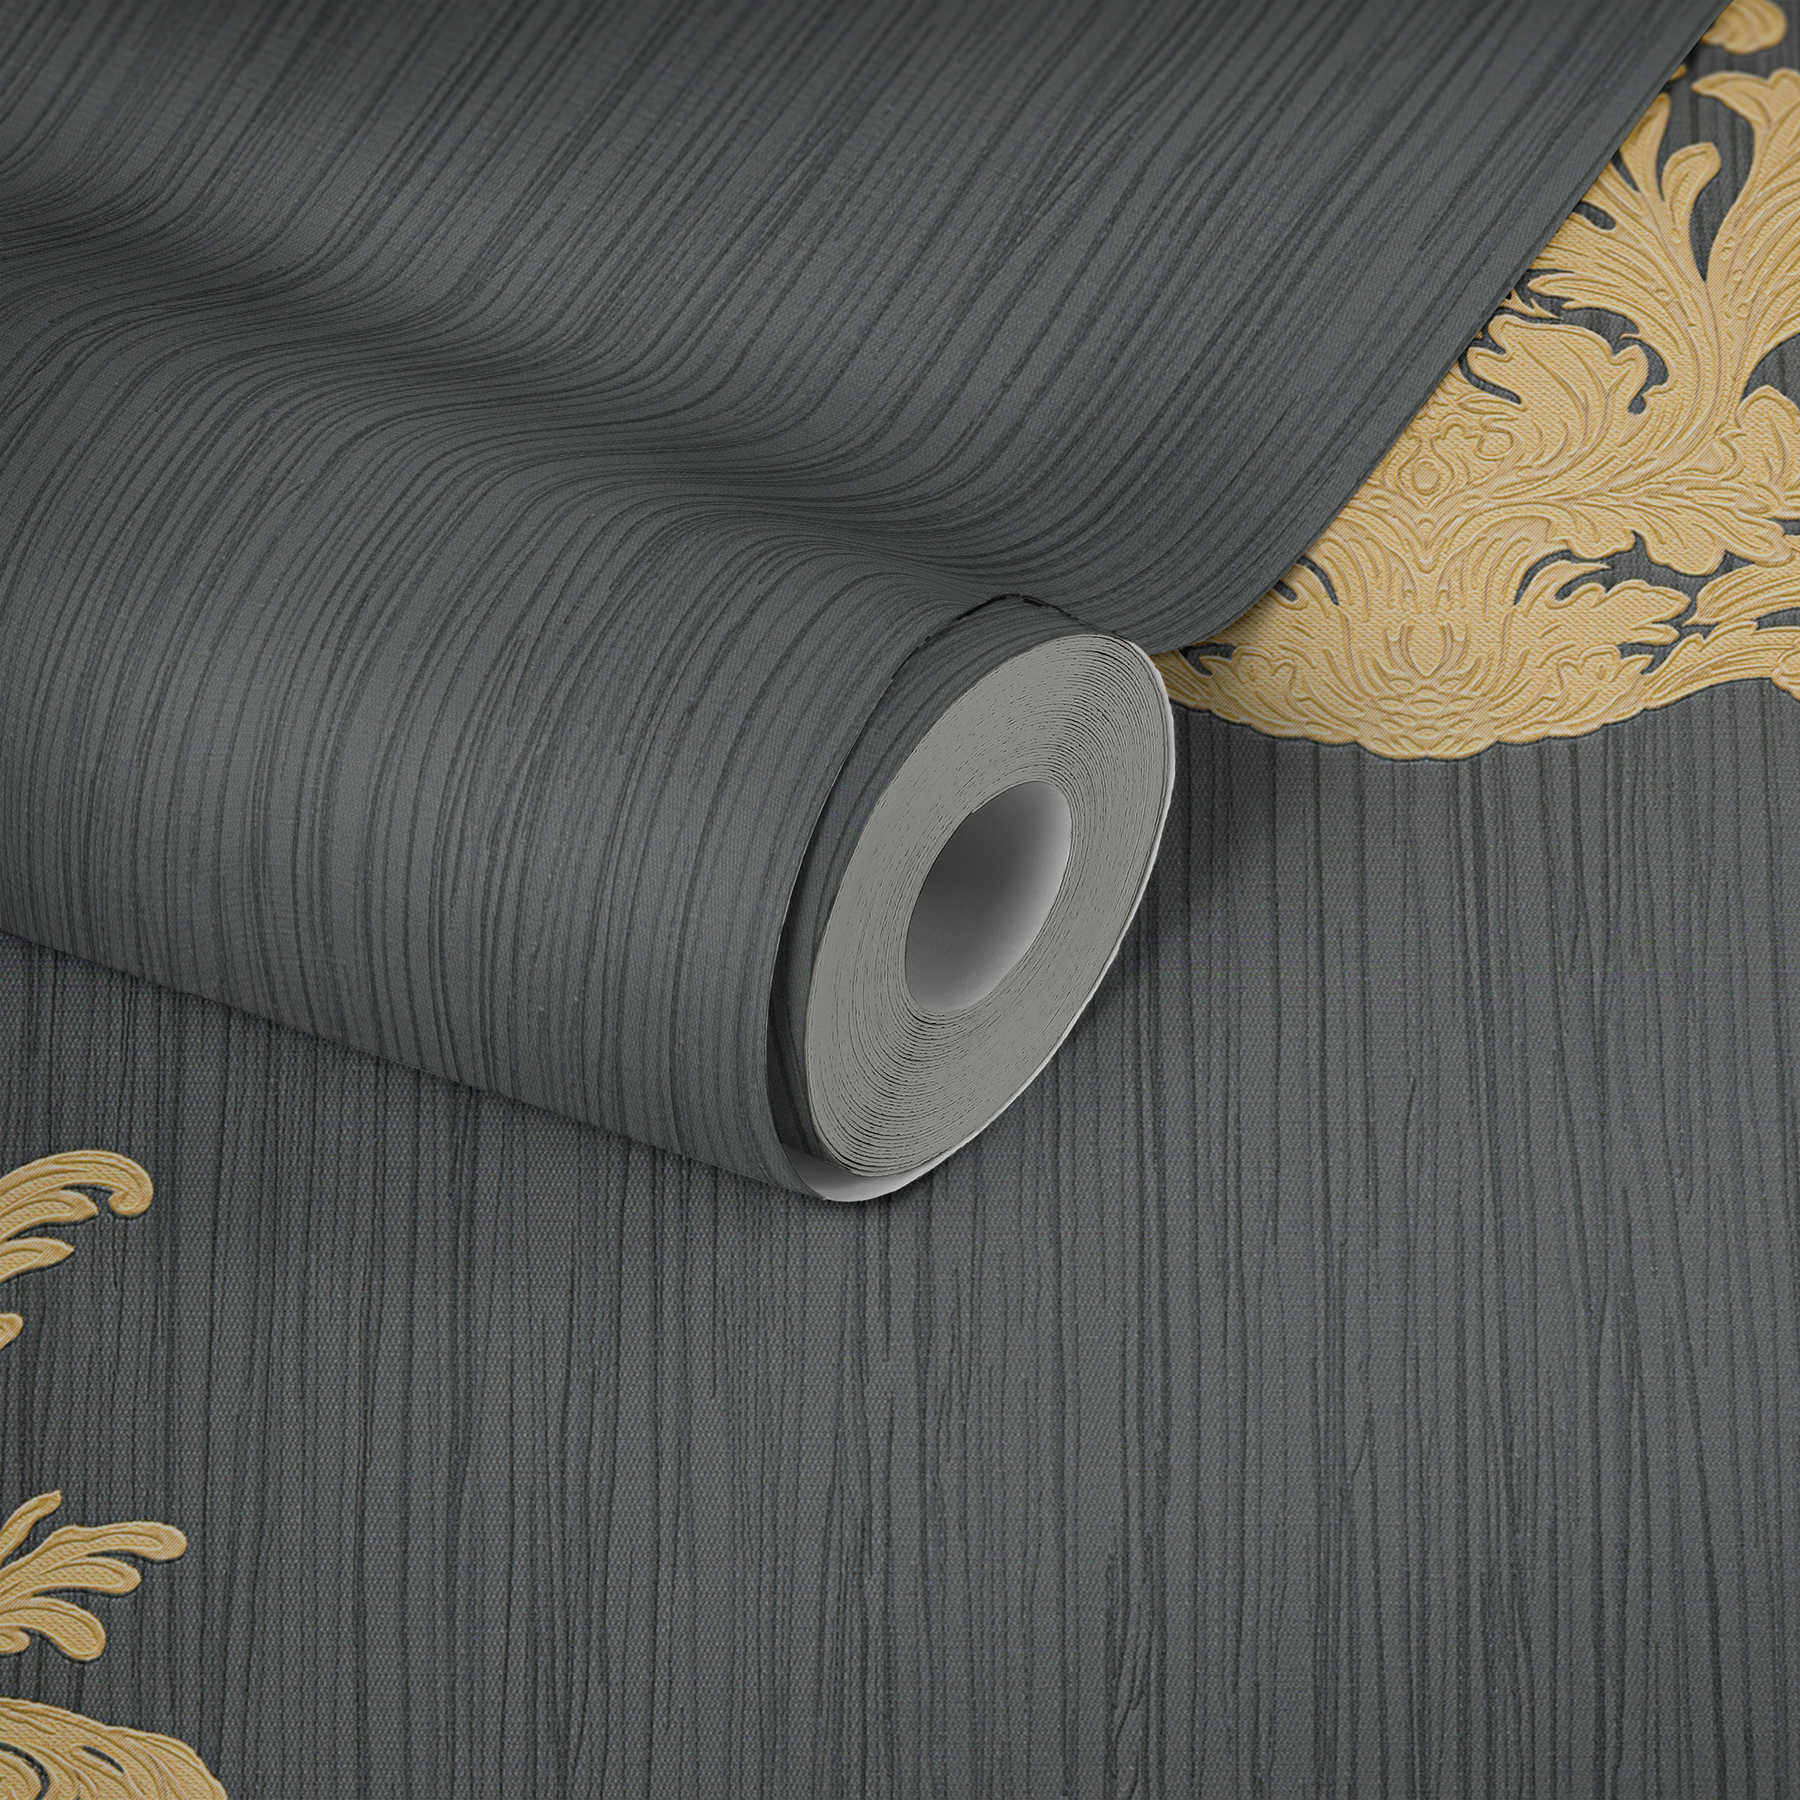             Black textile wallpaper with gold emblem with filigree embossed pattern
        